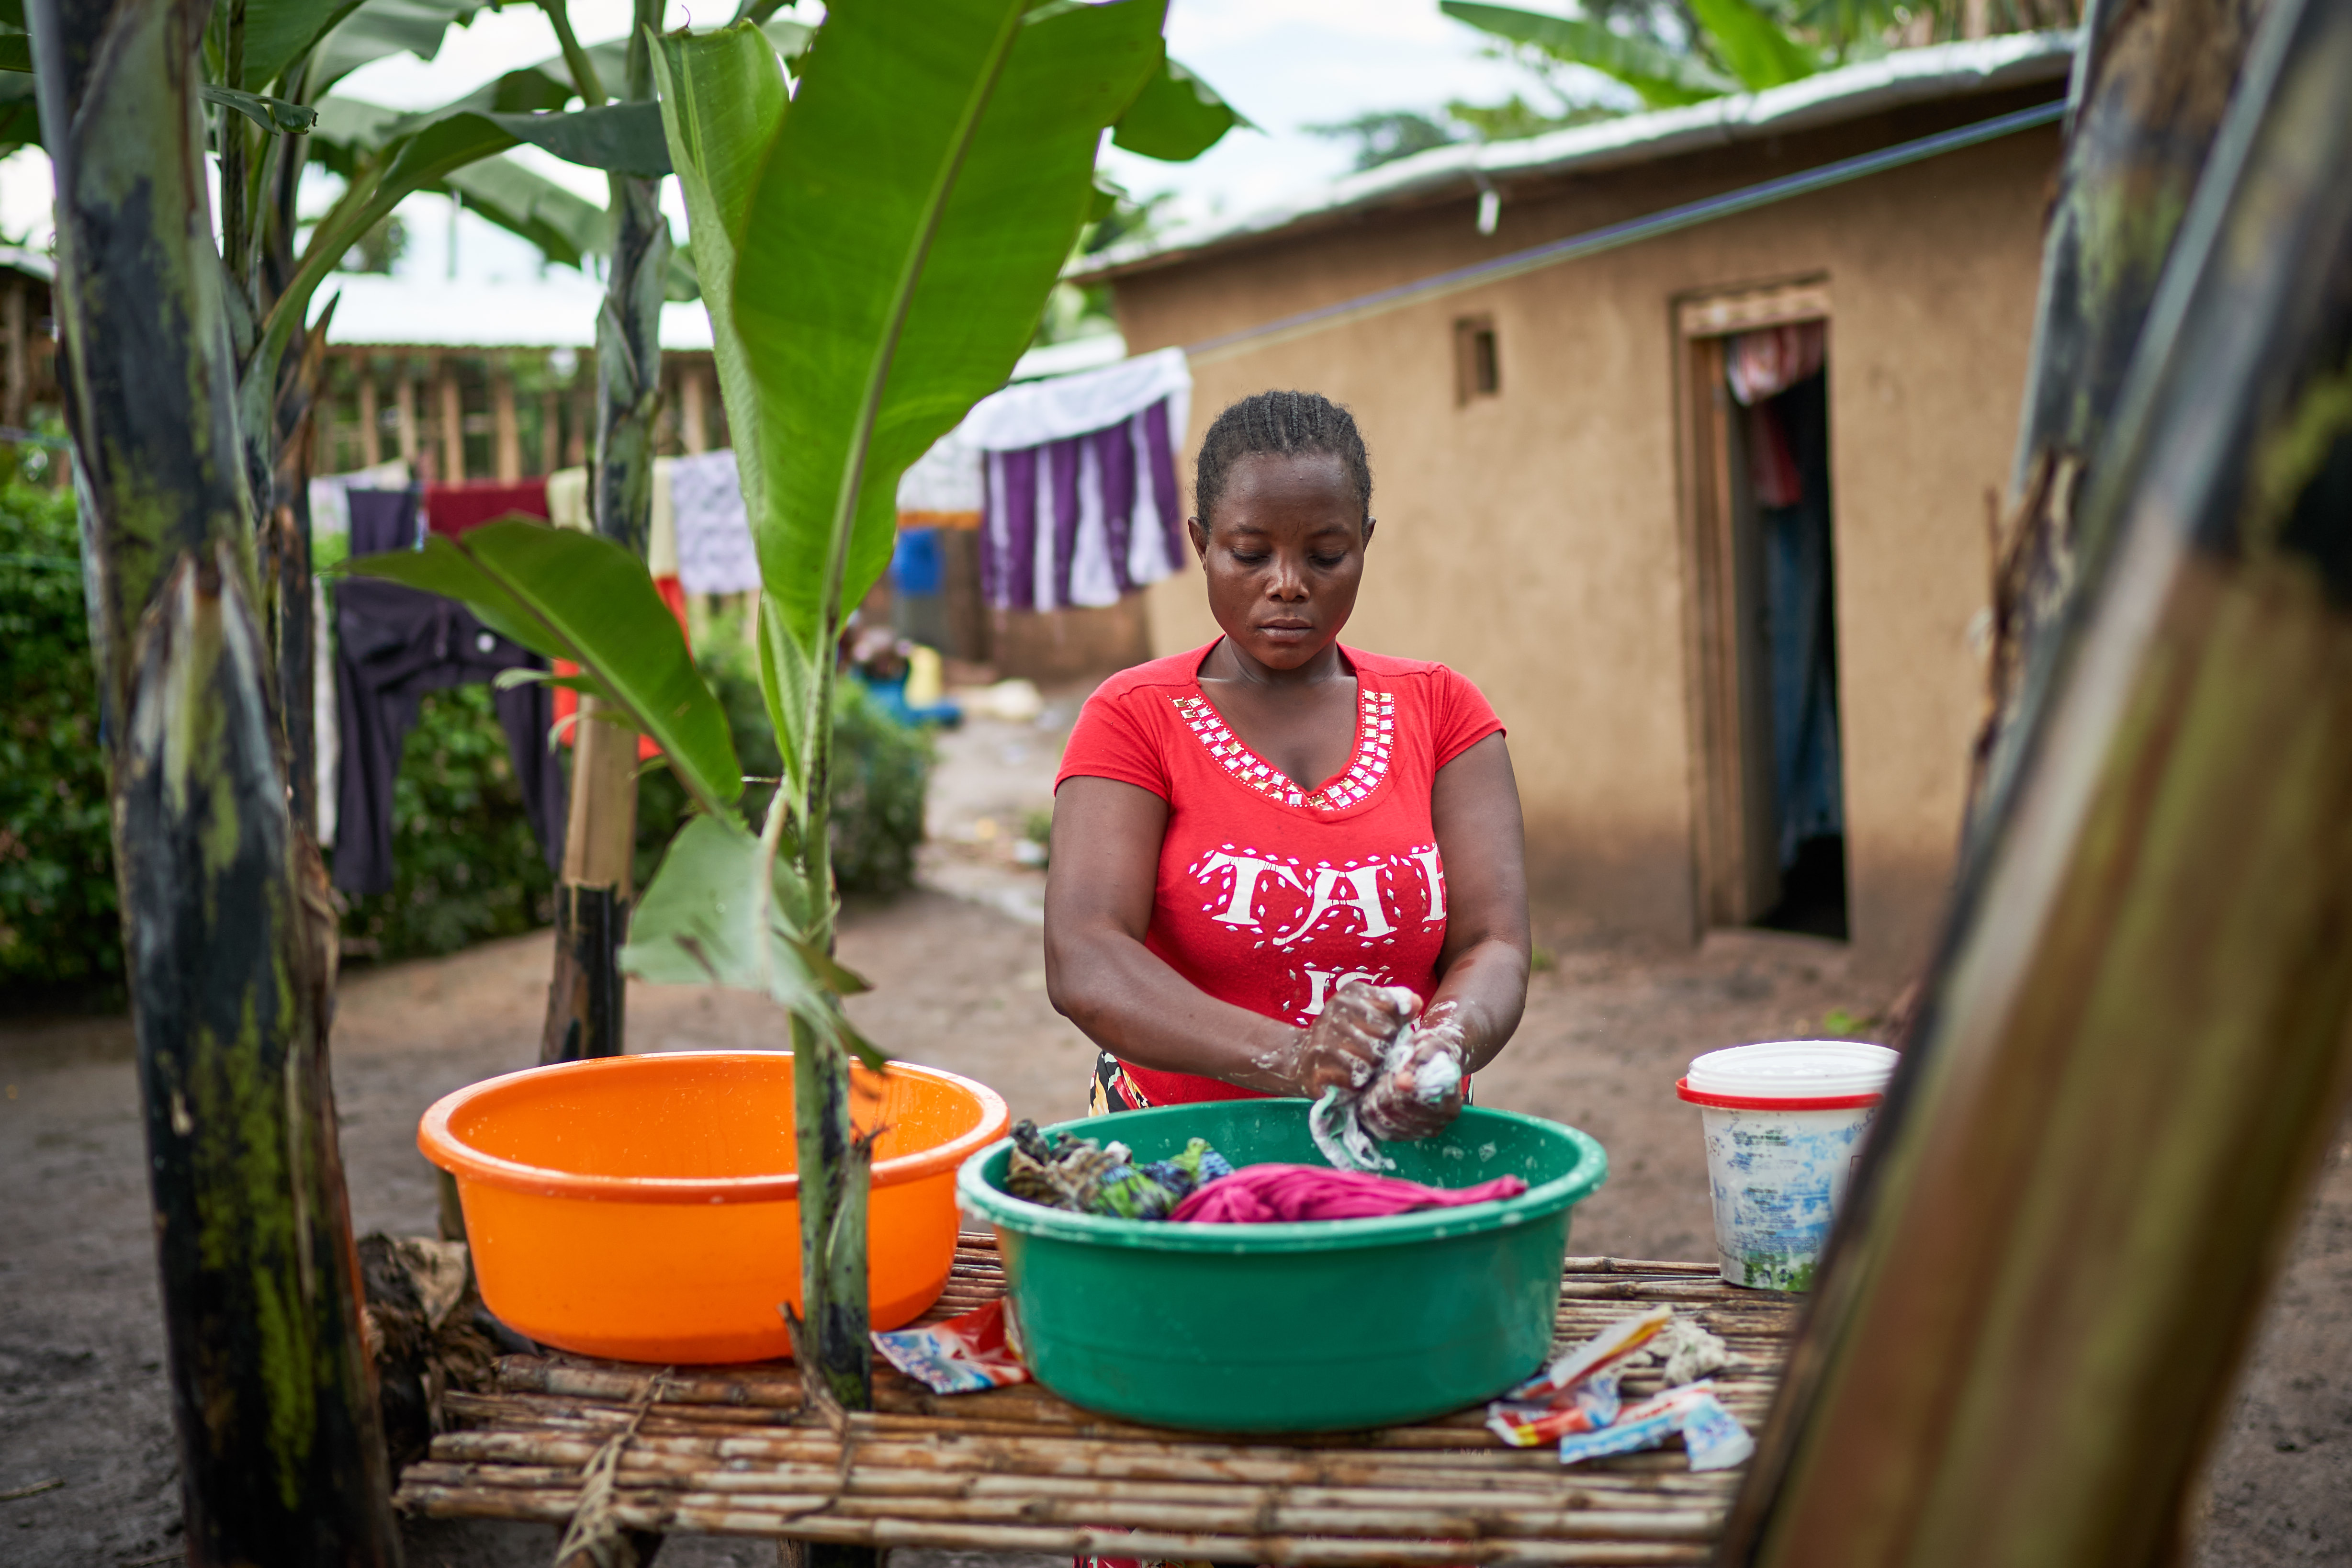 Janet washes clothes outside her home in Kyangwali refugee settlement in Uganda